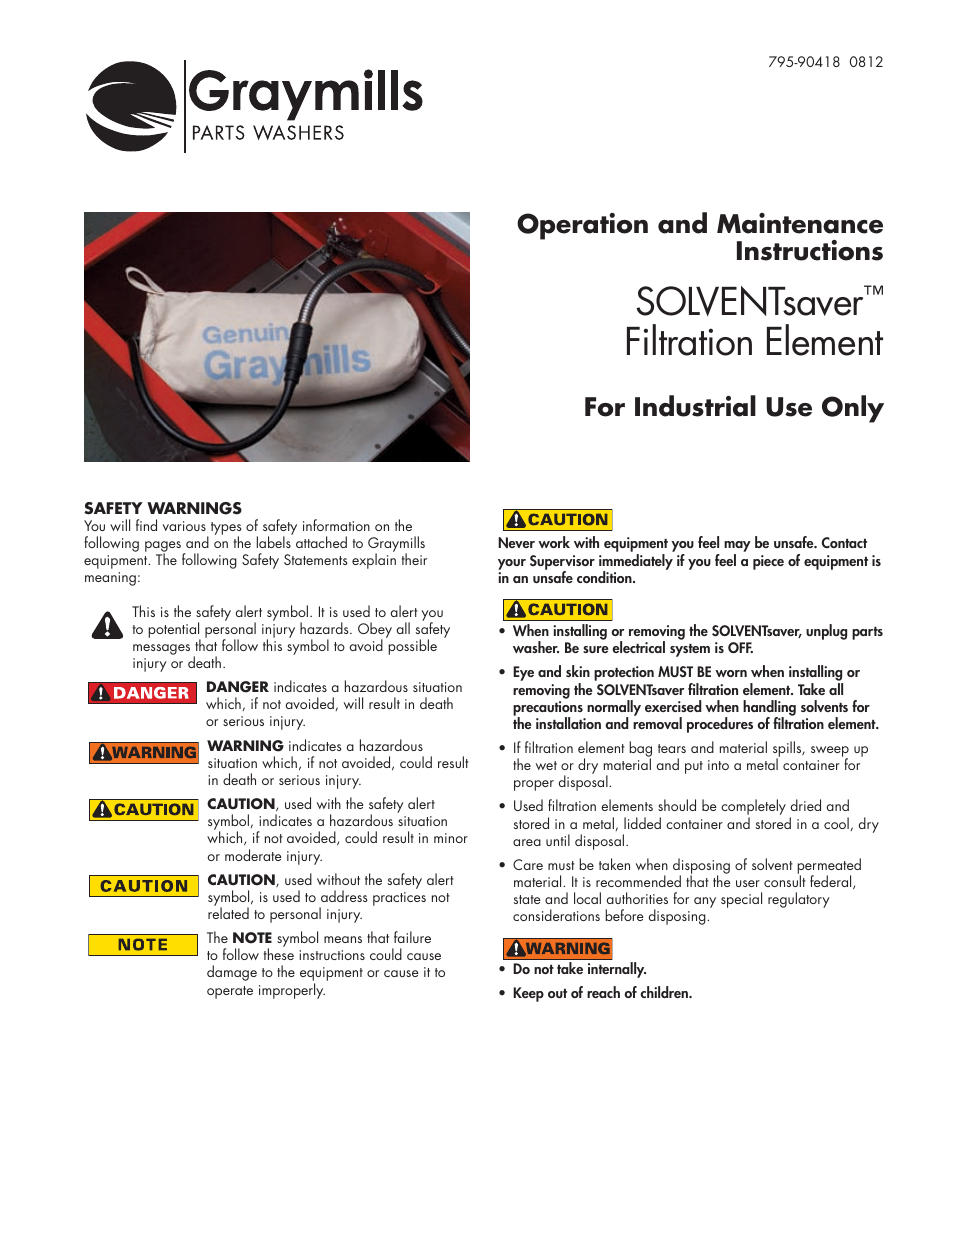 Graymills Solvent Saver User Manual | 2 pages